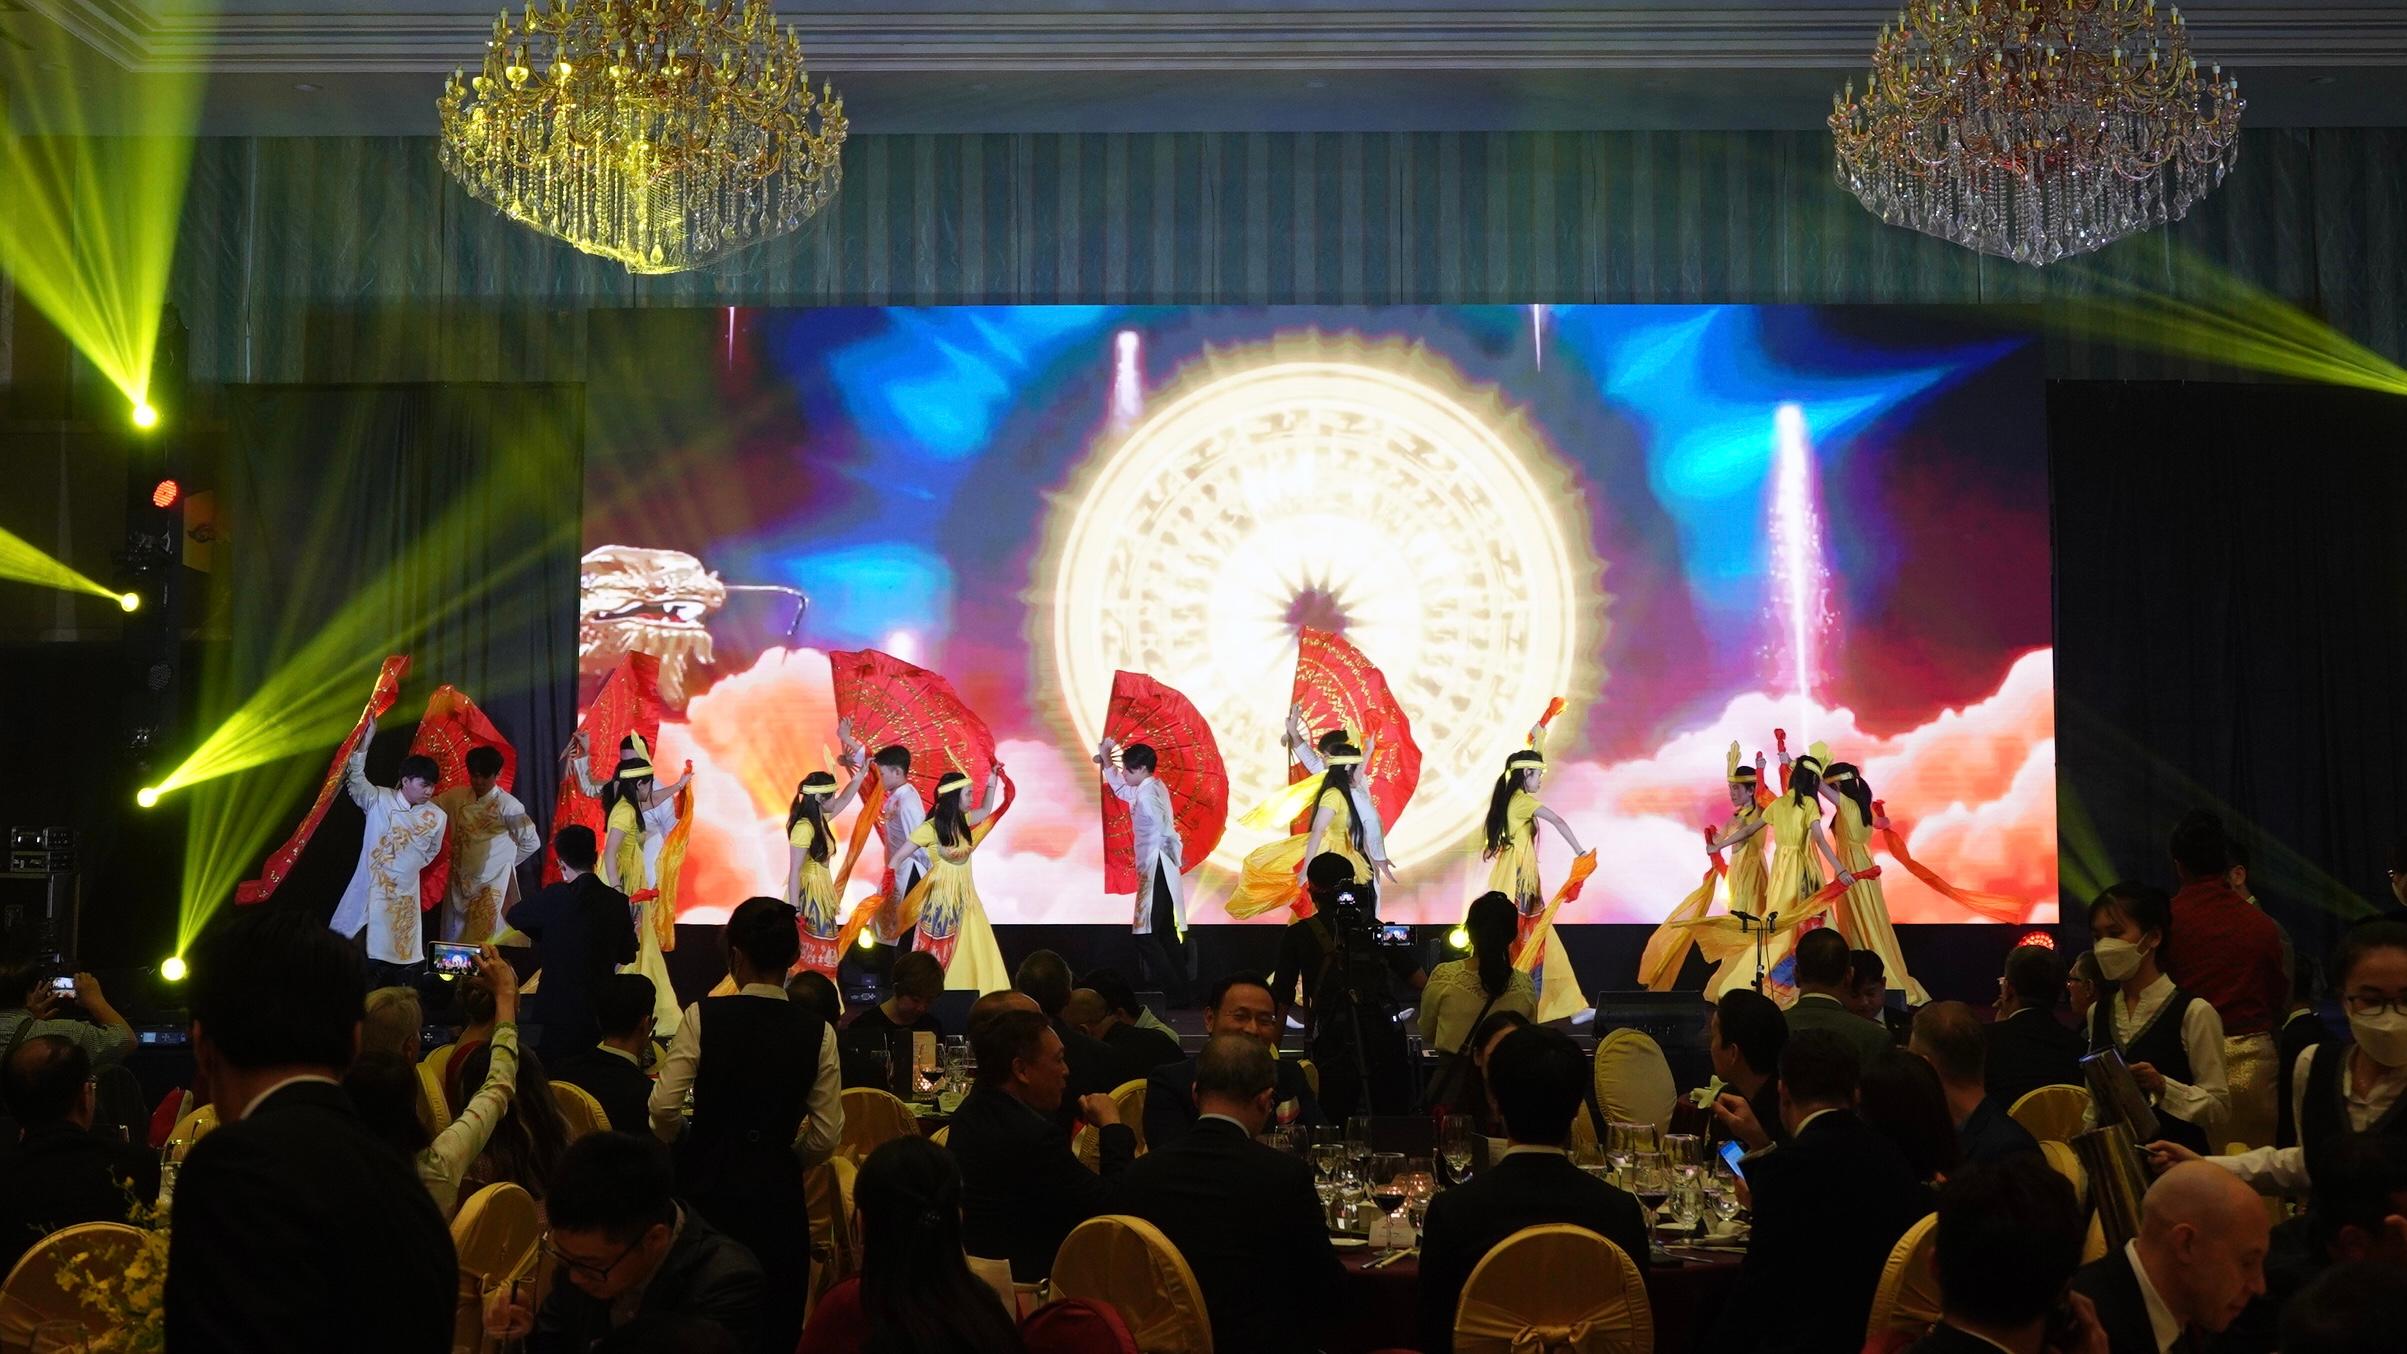 The Hong Kong Economic and Trade Office in Singapore hosted a gala dinner in Ho Chi Minh City, Vietnam today (August 27) in celebration of the 25th anniversary of the establishment of the Hong Kong Special Administrative Region. Photo shows a folk dance performance by a group of Vietnamese students with hearing impairment, as part of efforts to demonstrate social inclusion and cultural exchange between Hong Kong and Vietnam.  
